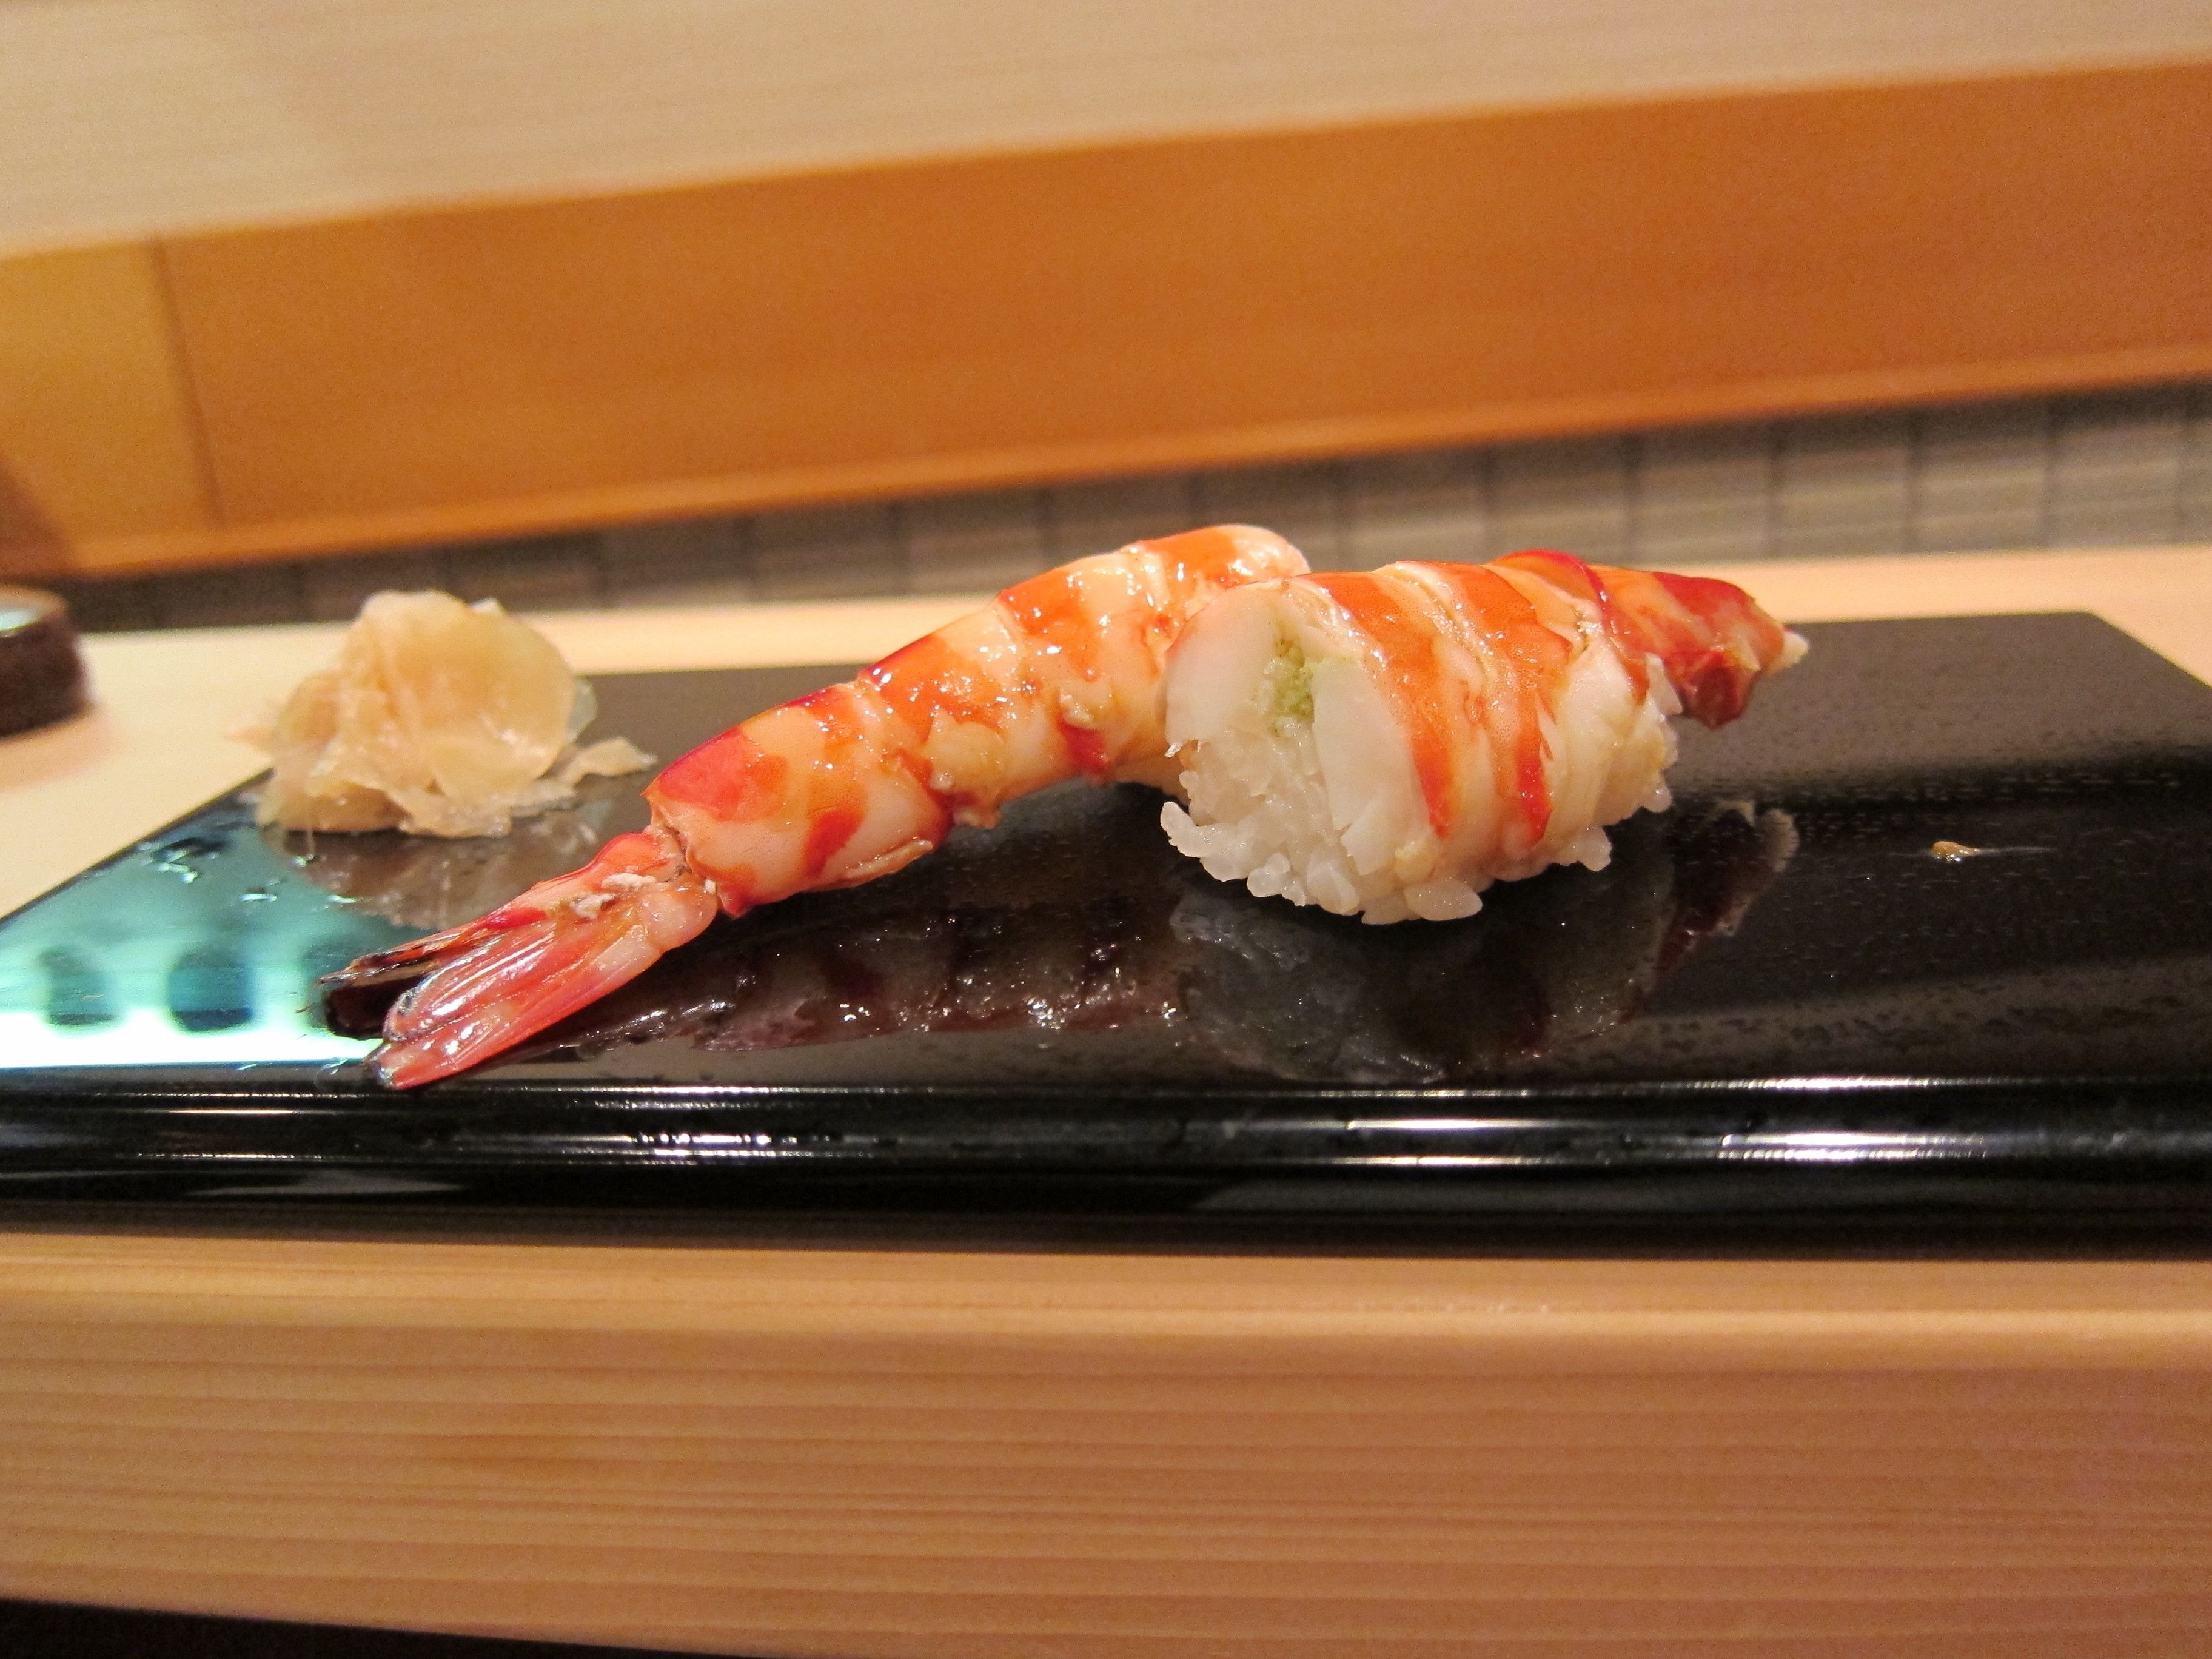 These standing sushi restaurants in Tokyo offer top quality cuisine